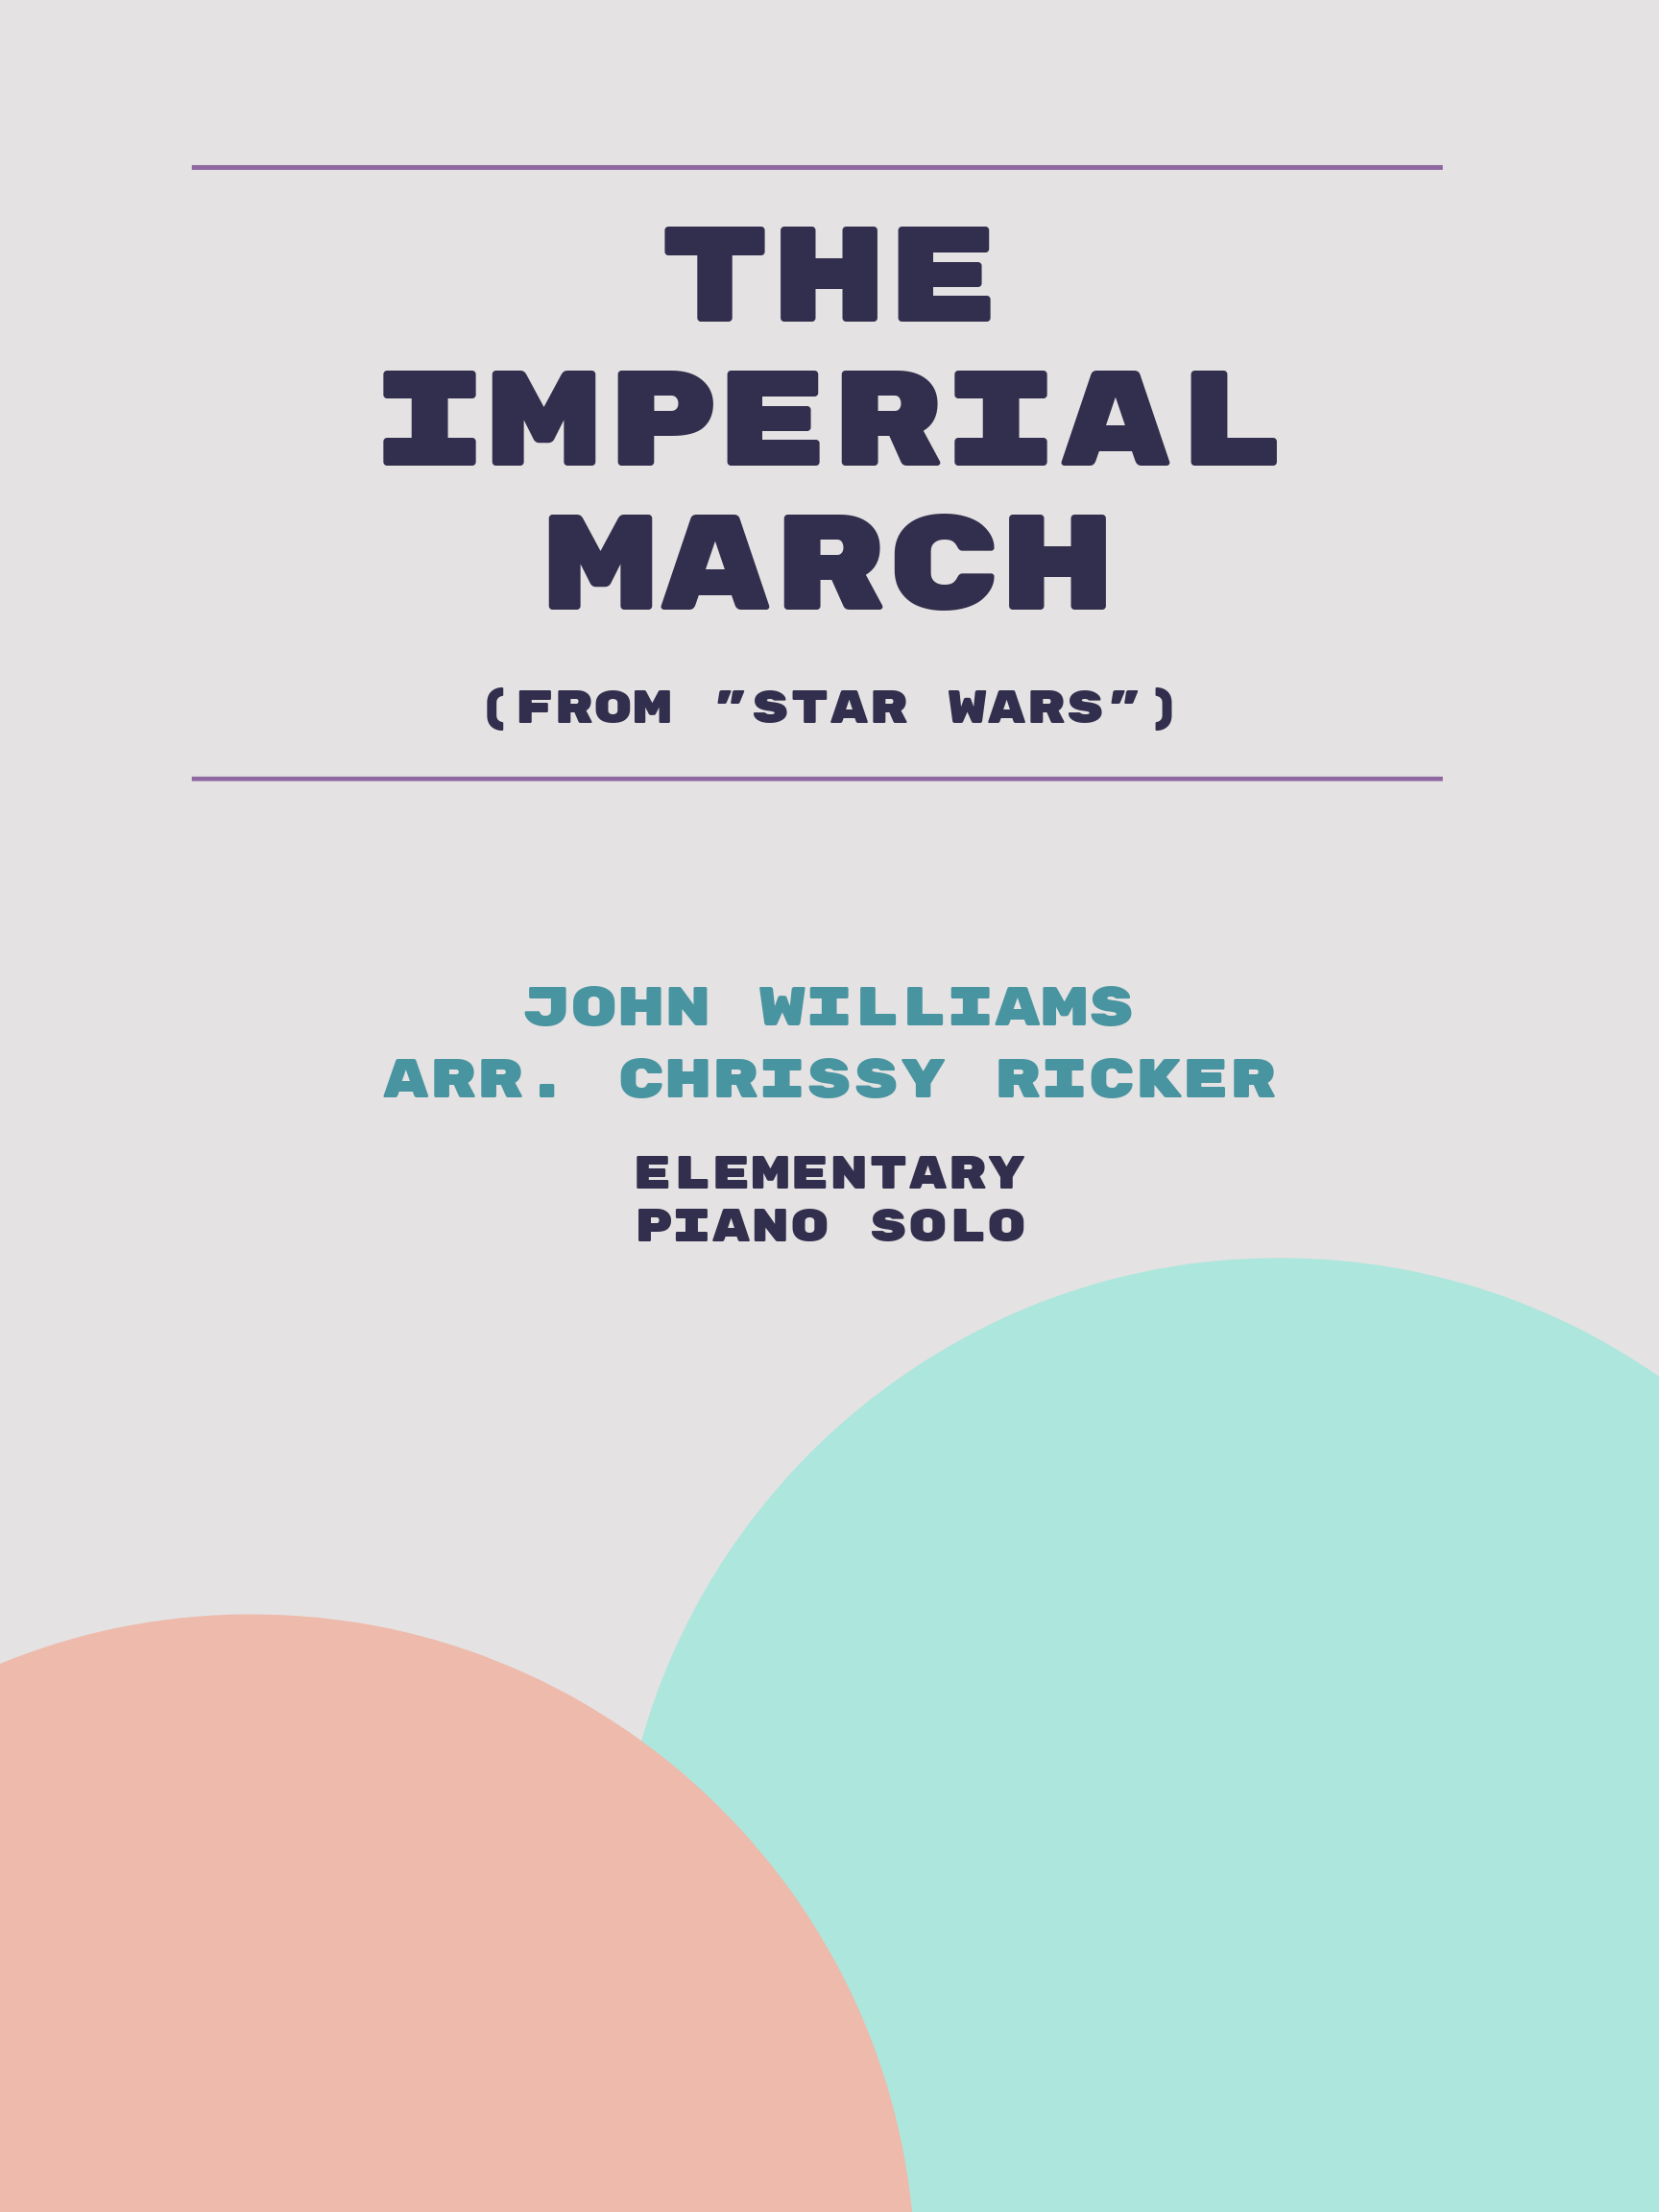 The Imperial March by John Williams